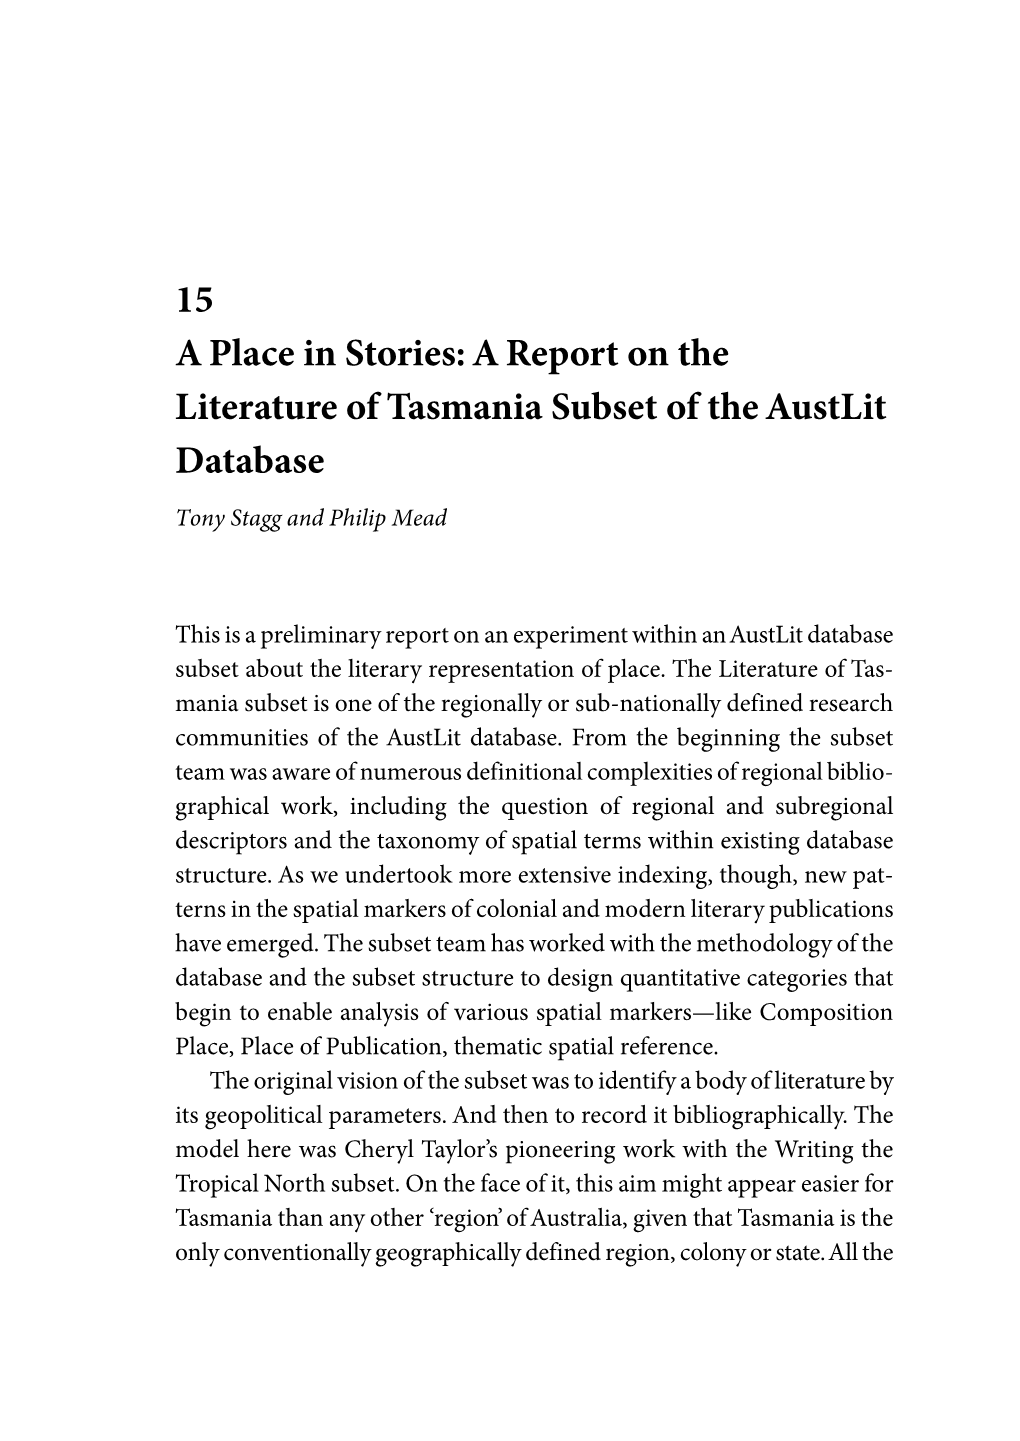 15 a Place in Stories: a Report on the Literature of Tasmania Subset of the Austlit Database